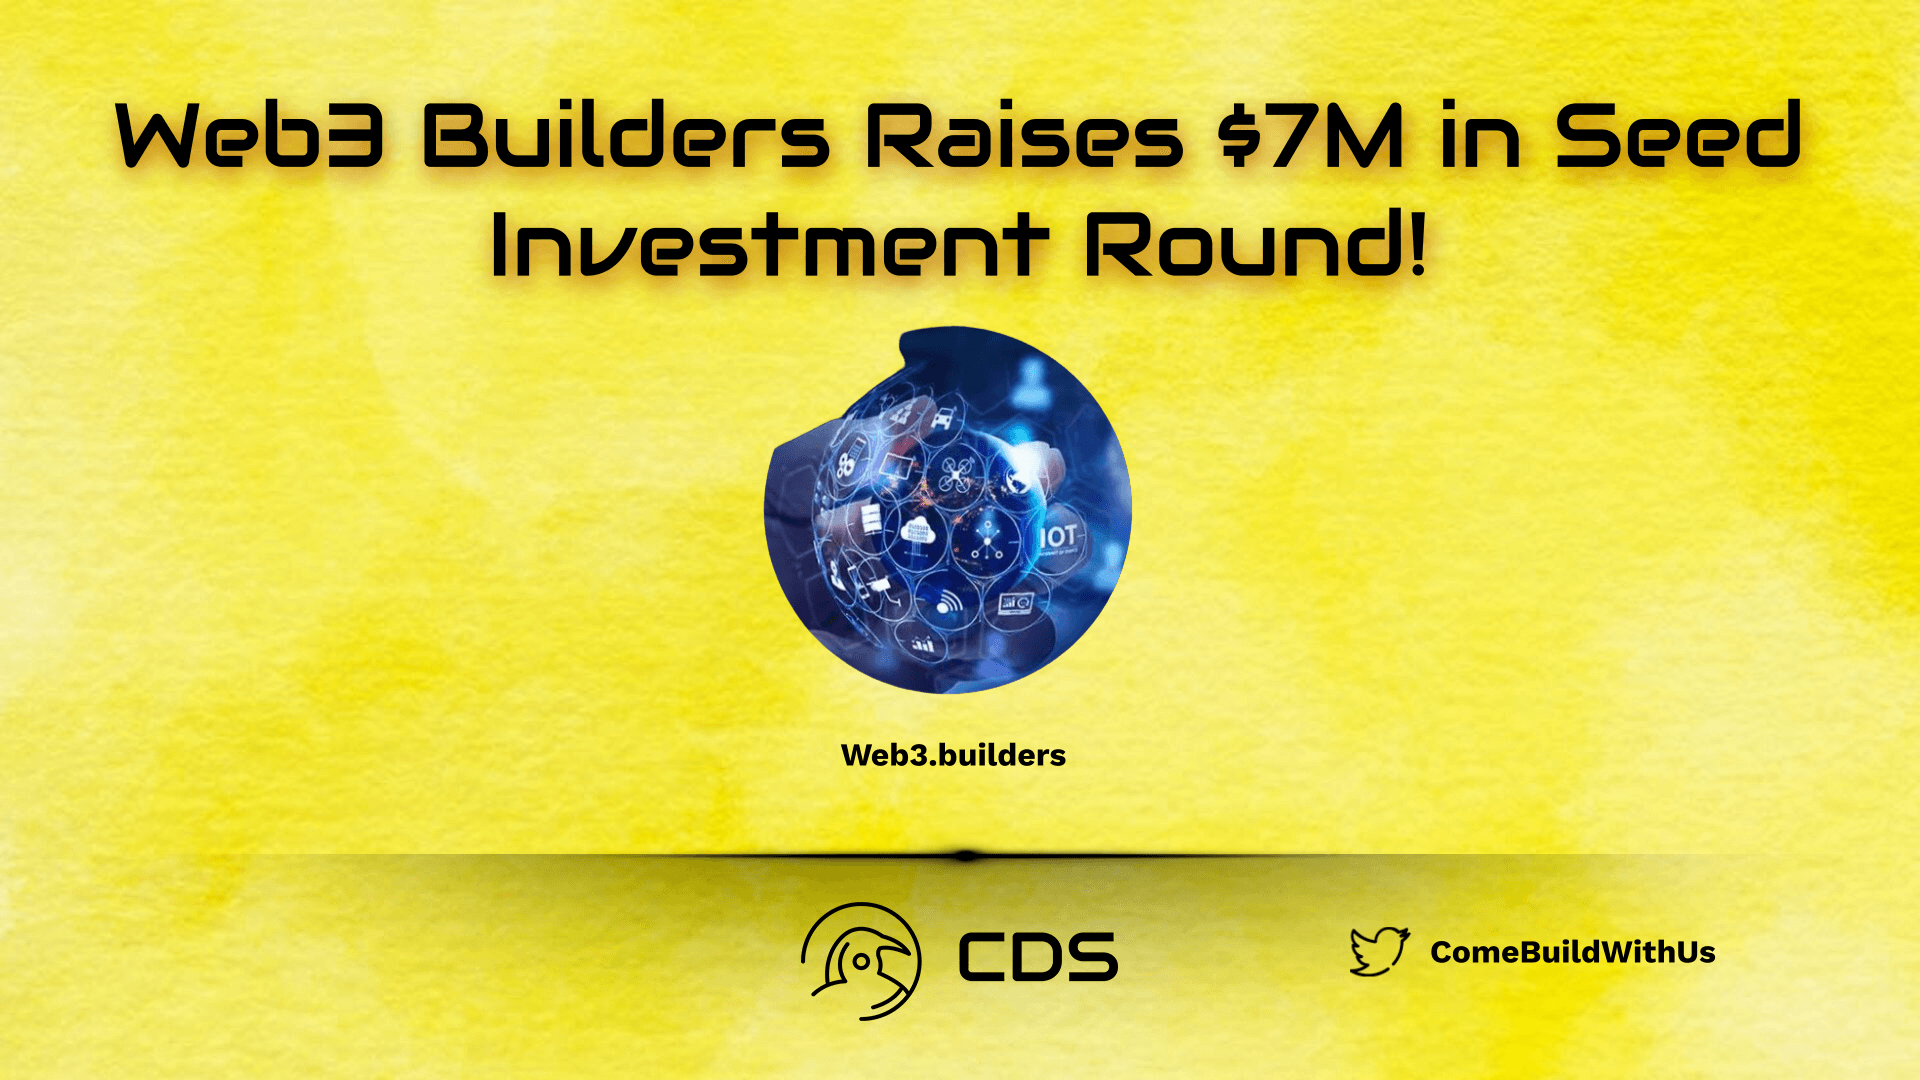 Web3 Builders Raises $7M in Seed Investment Round!